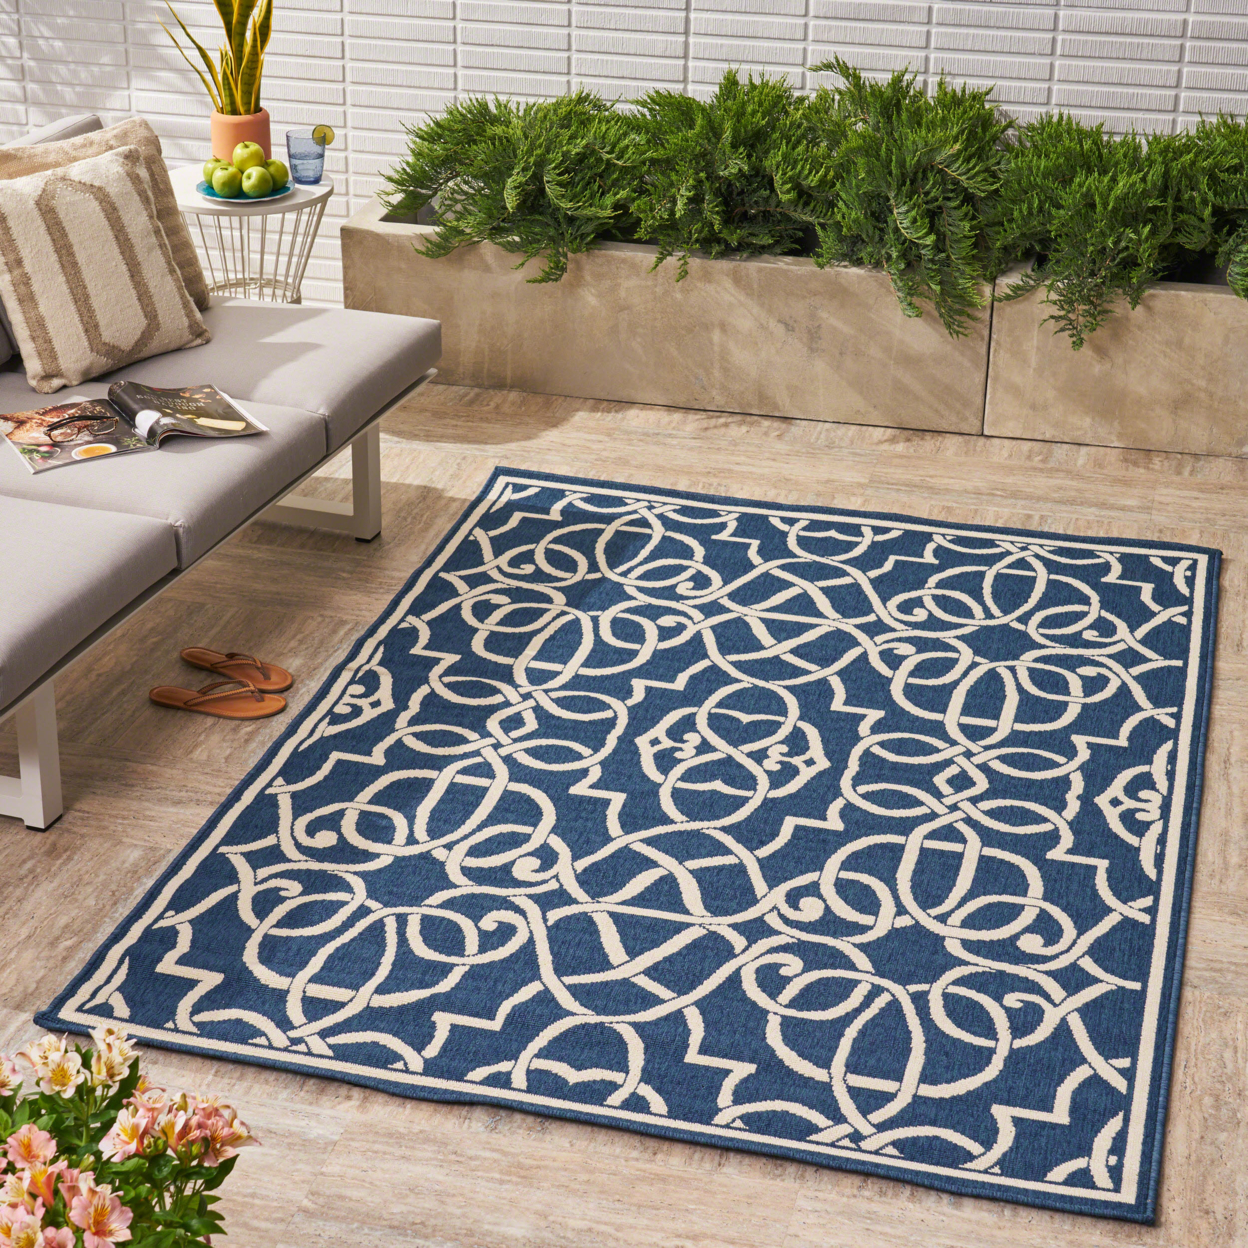 Alfonso Outdoor Geometric Area Rug - 5'x8', Navy/Ivory